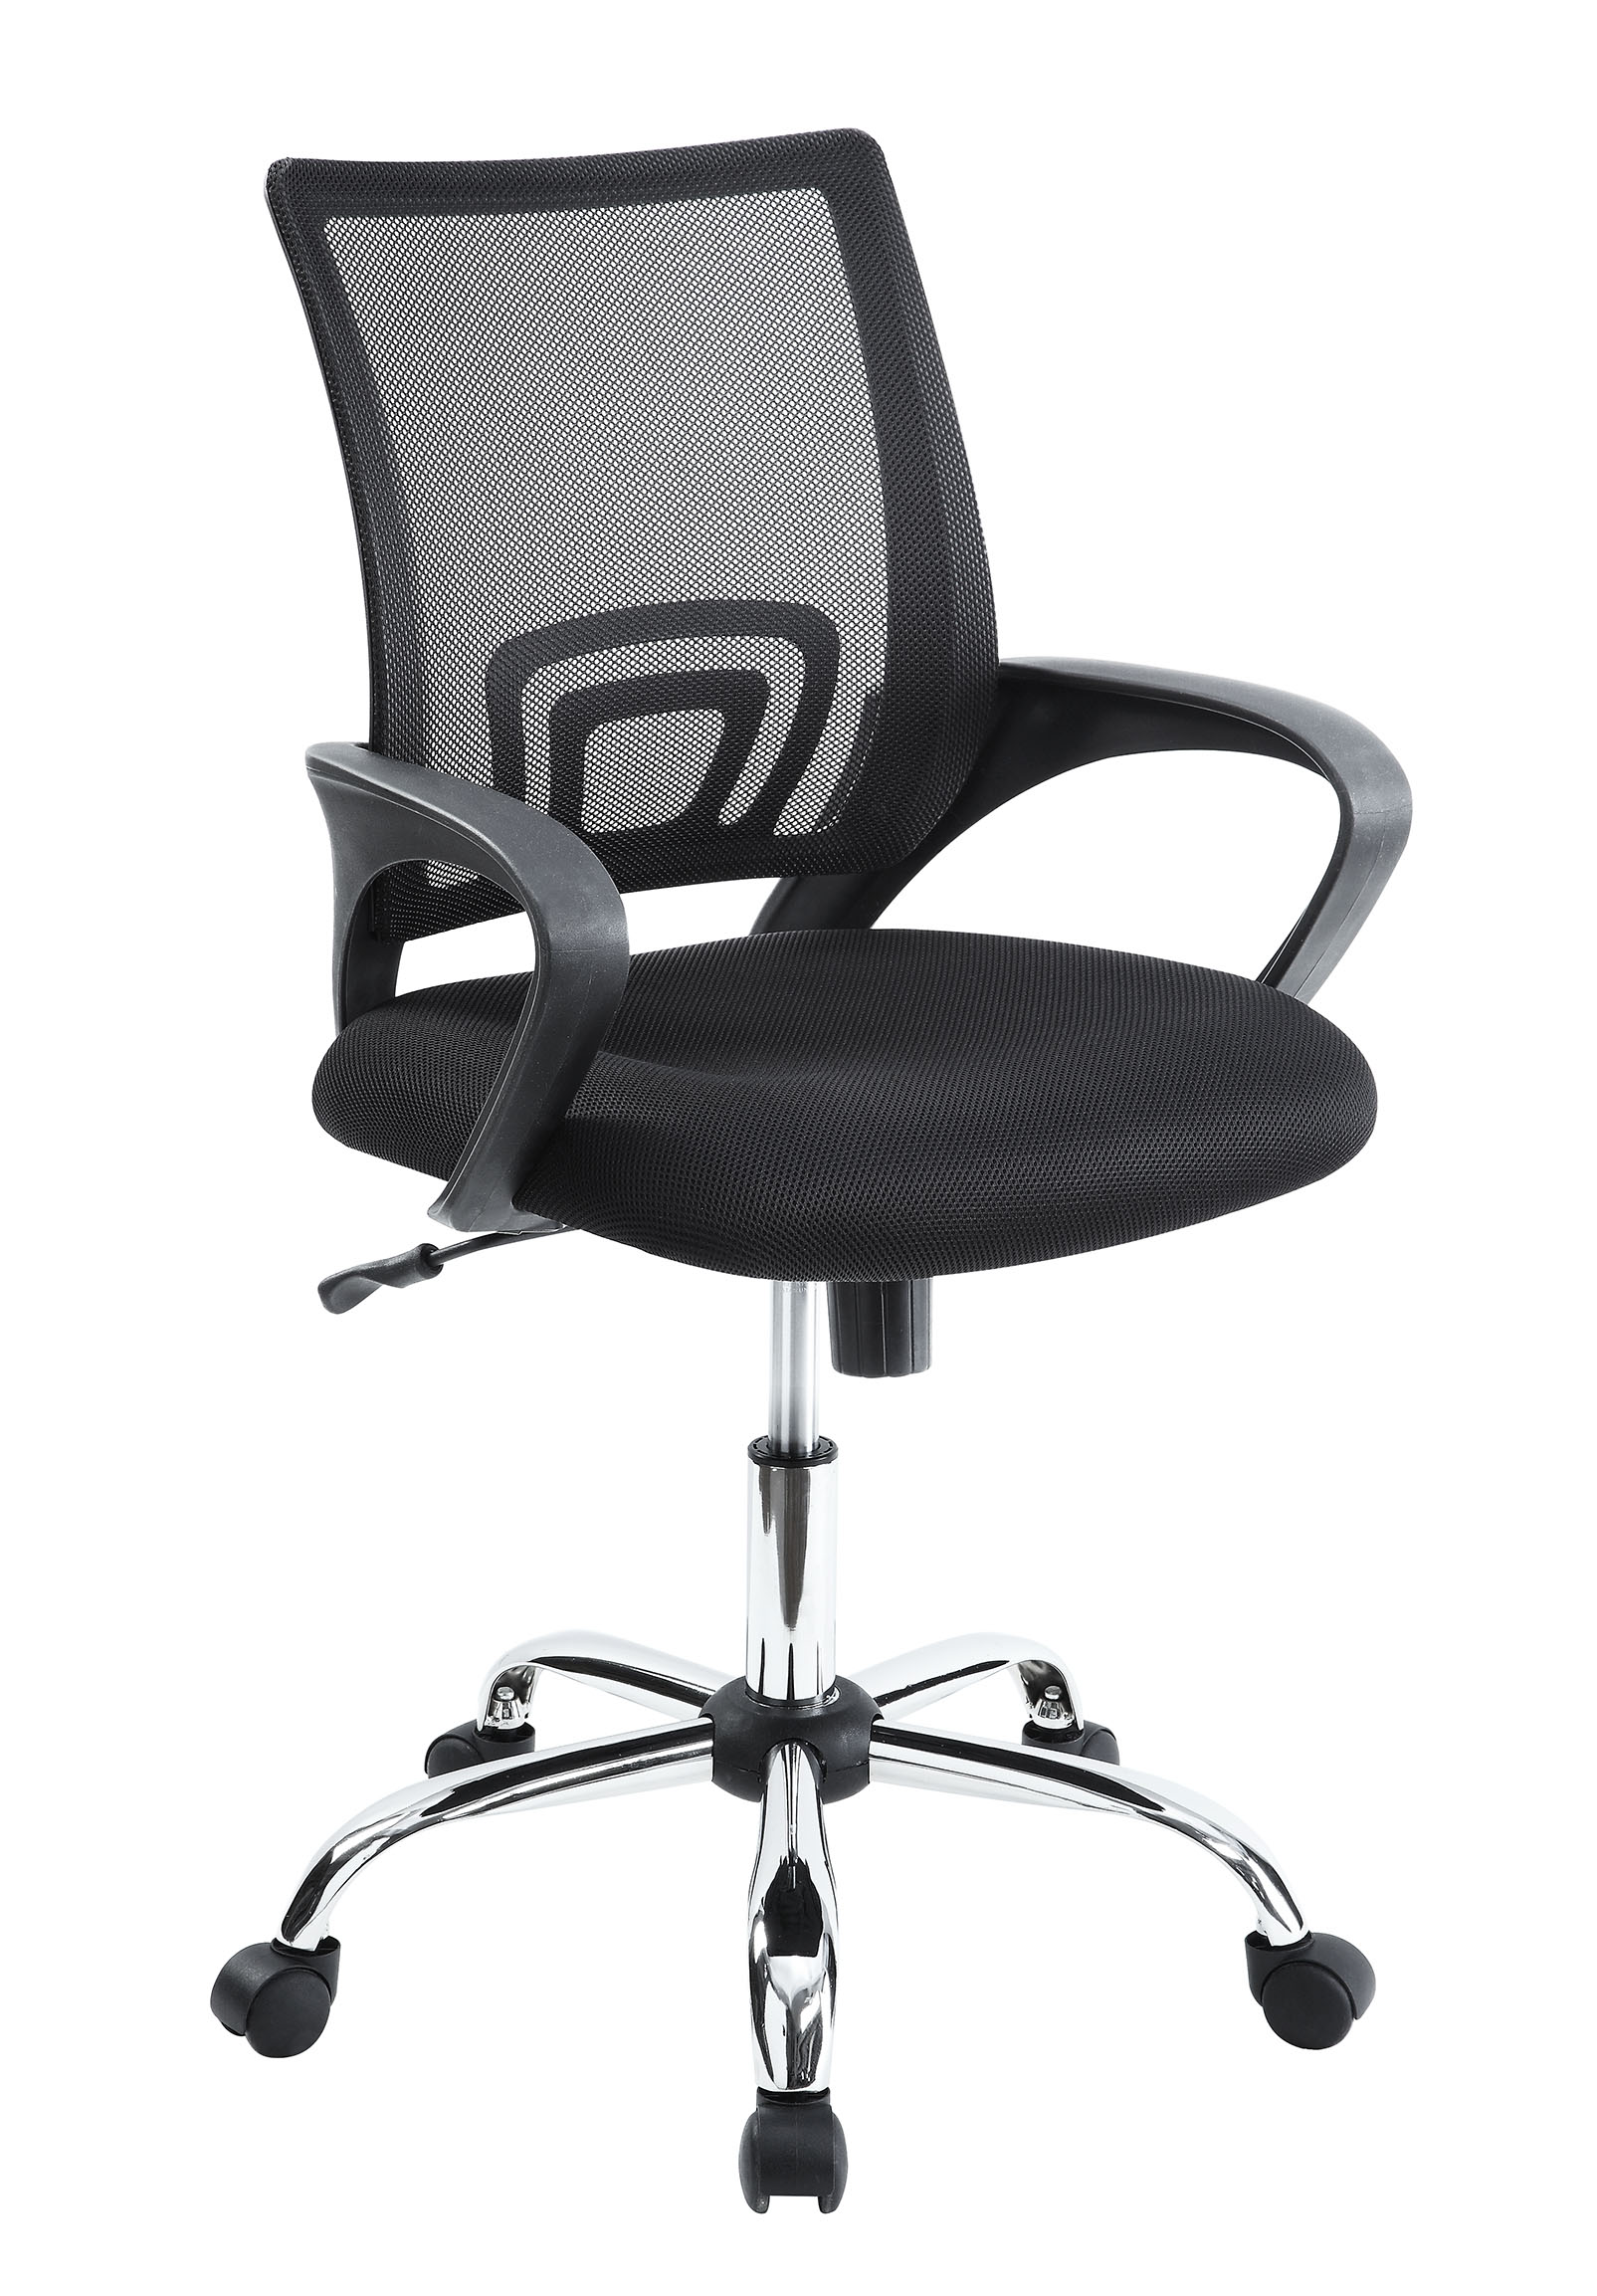 Mainstays Mesh Office Chair with Arms - Walmart.com